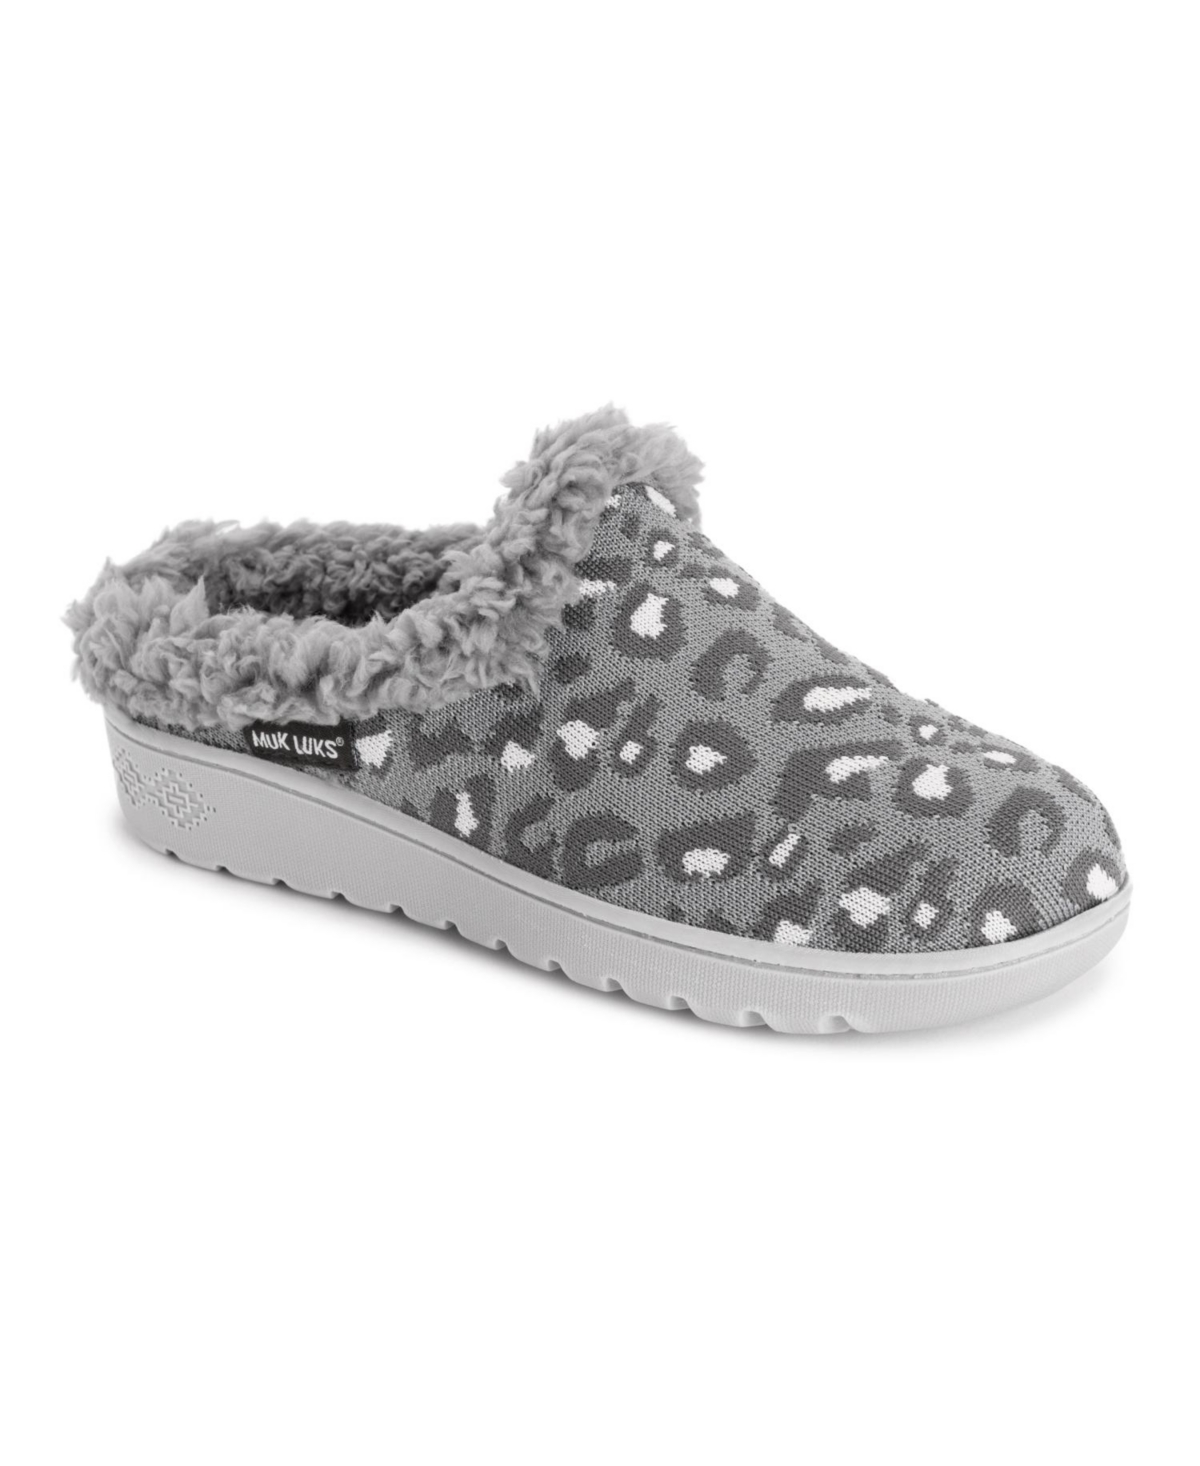 Women's Nony Fly knit Slippers - Blush